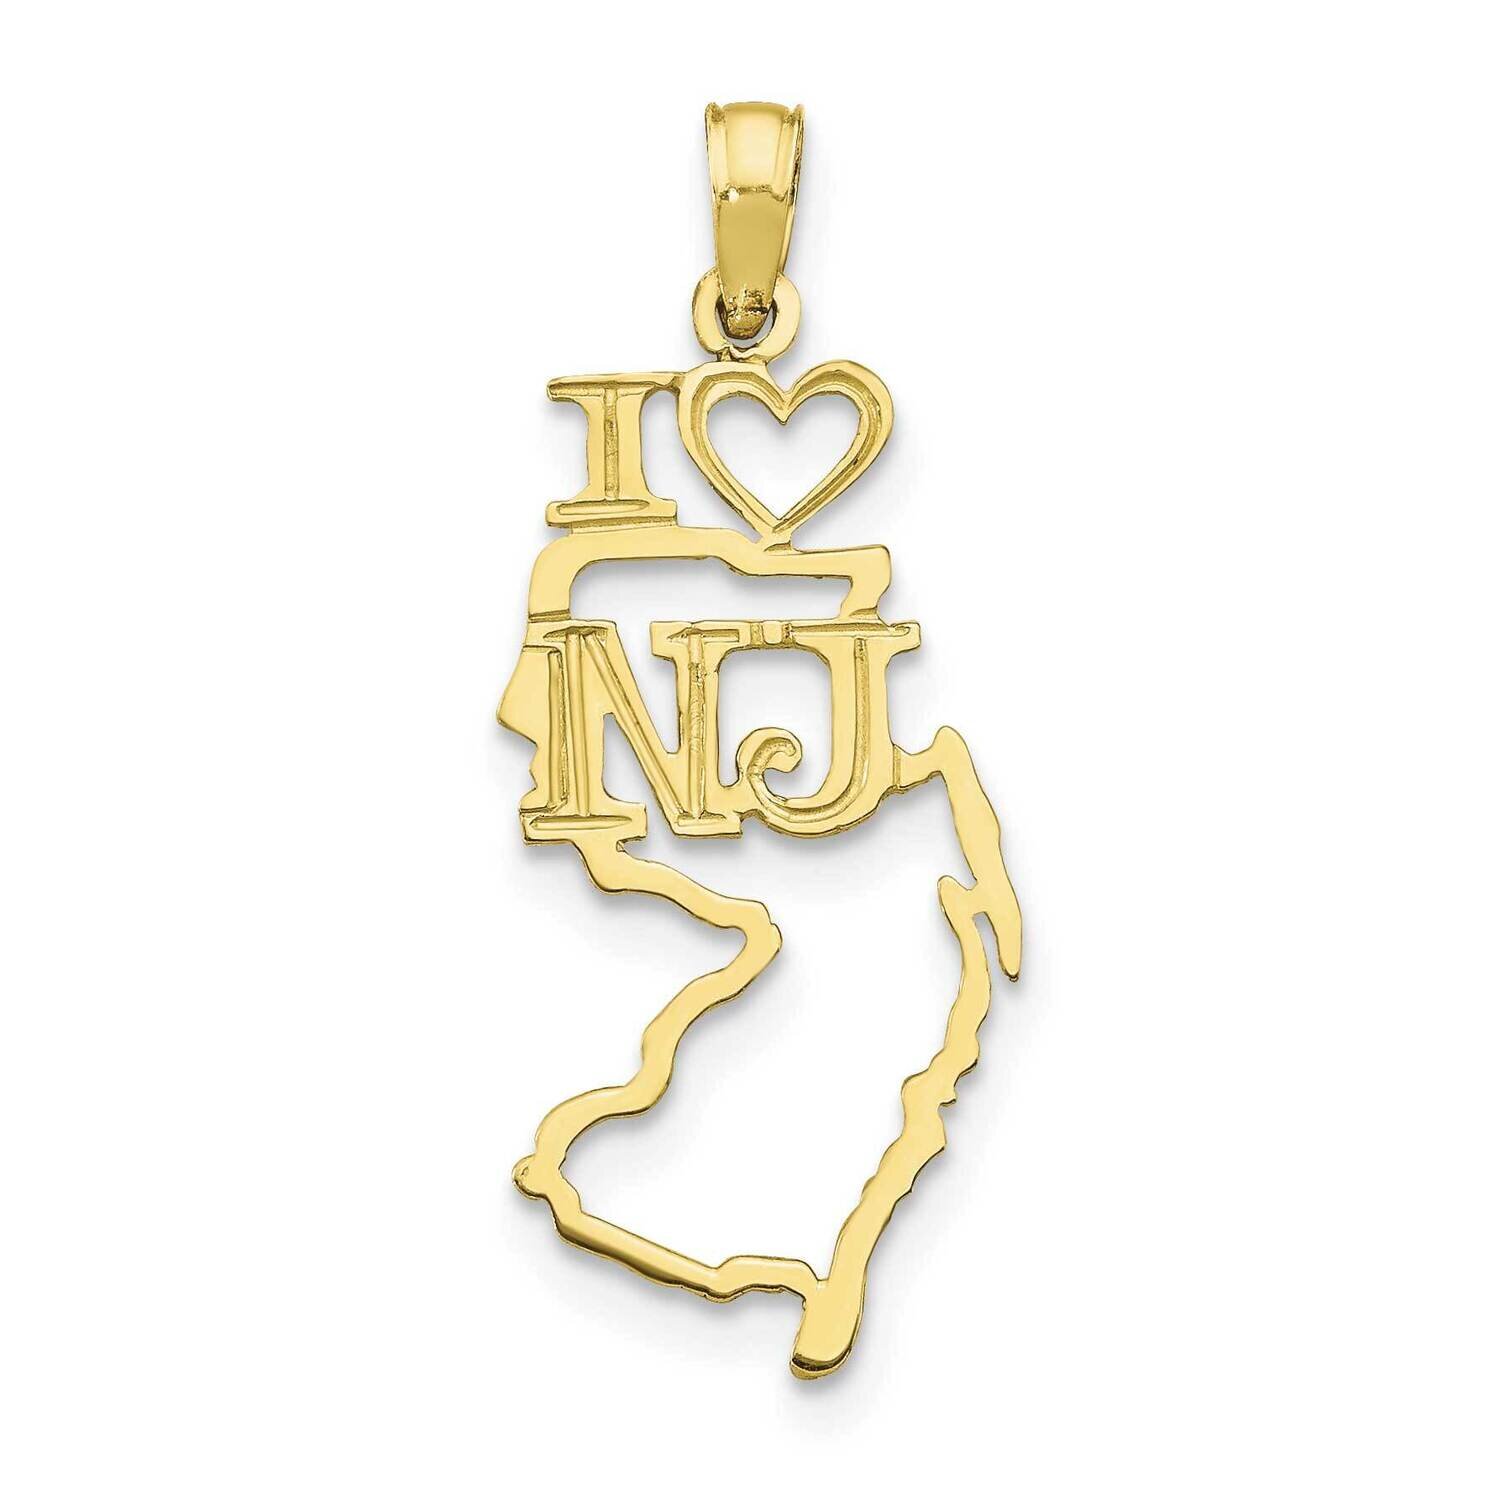 New Jersey State Pendant 10k Gold Solid 10D1178